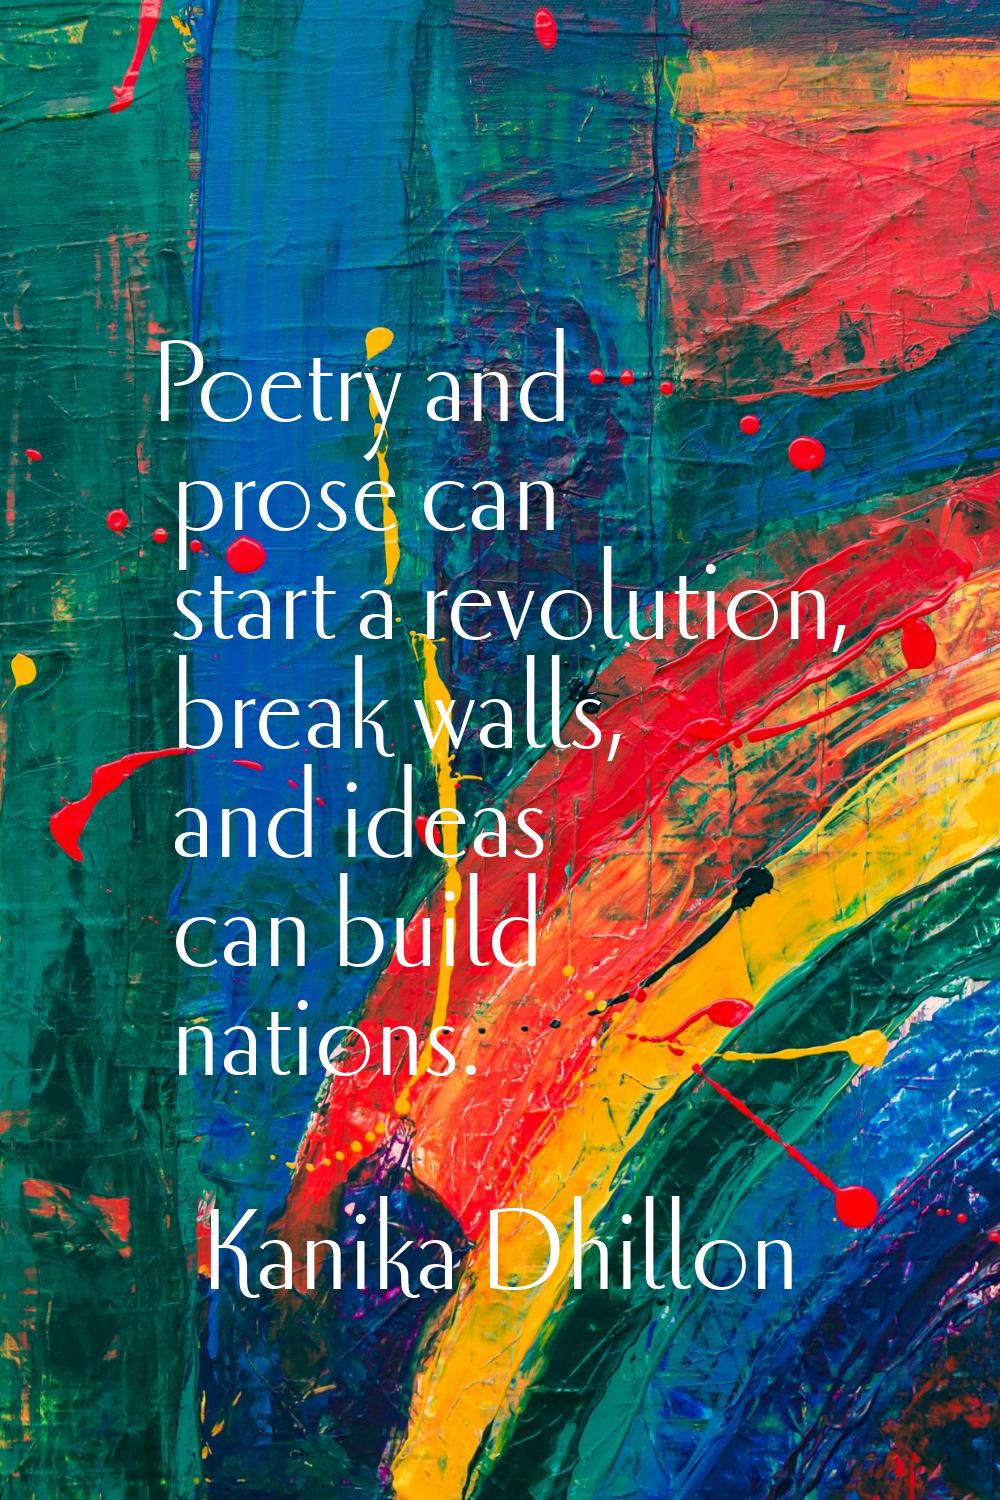 Poetry and prose can start a revolution, break walls, and ideas can build nations.